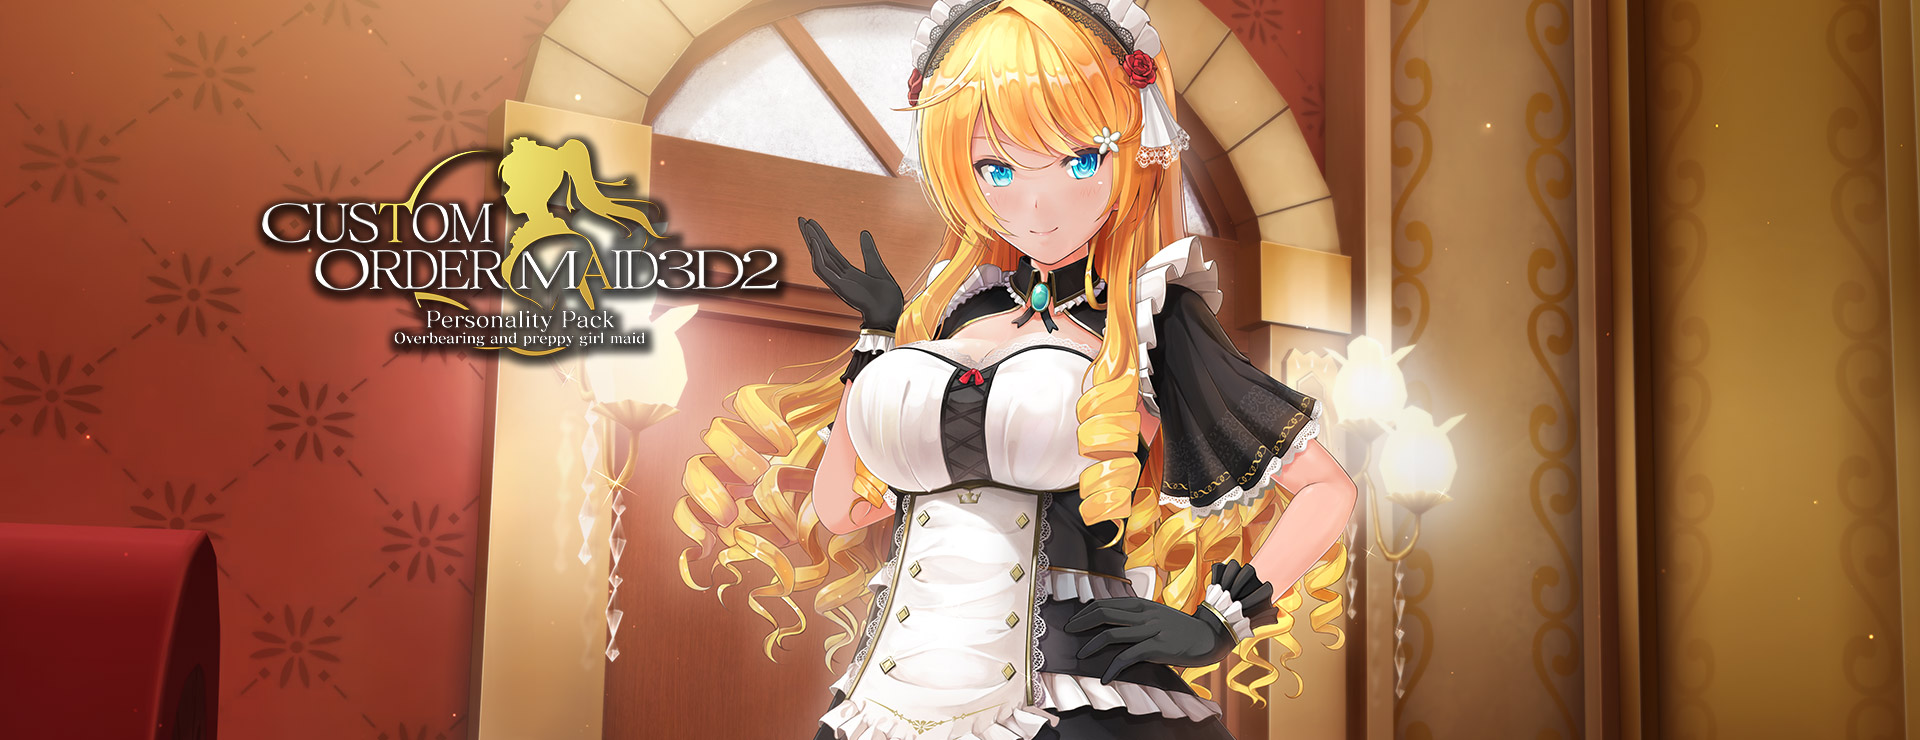 Custom Order Maid 3D 2: Overbearing and Preppy Girl Maid Complete Bundle - Simulation Jeu